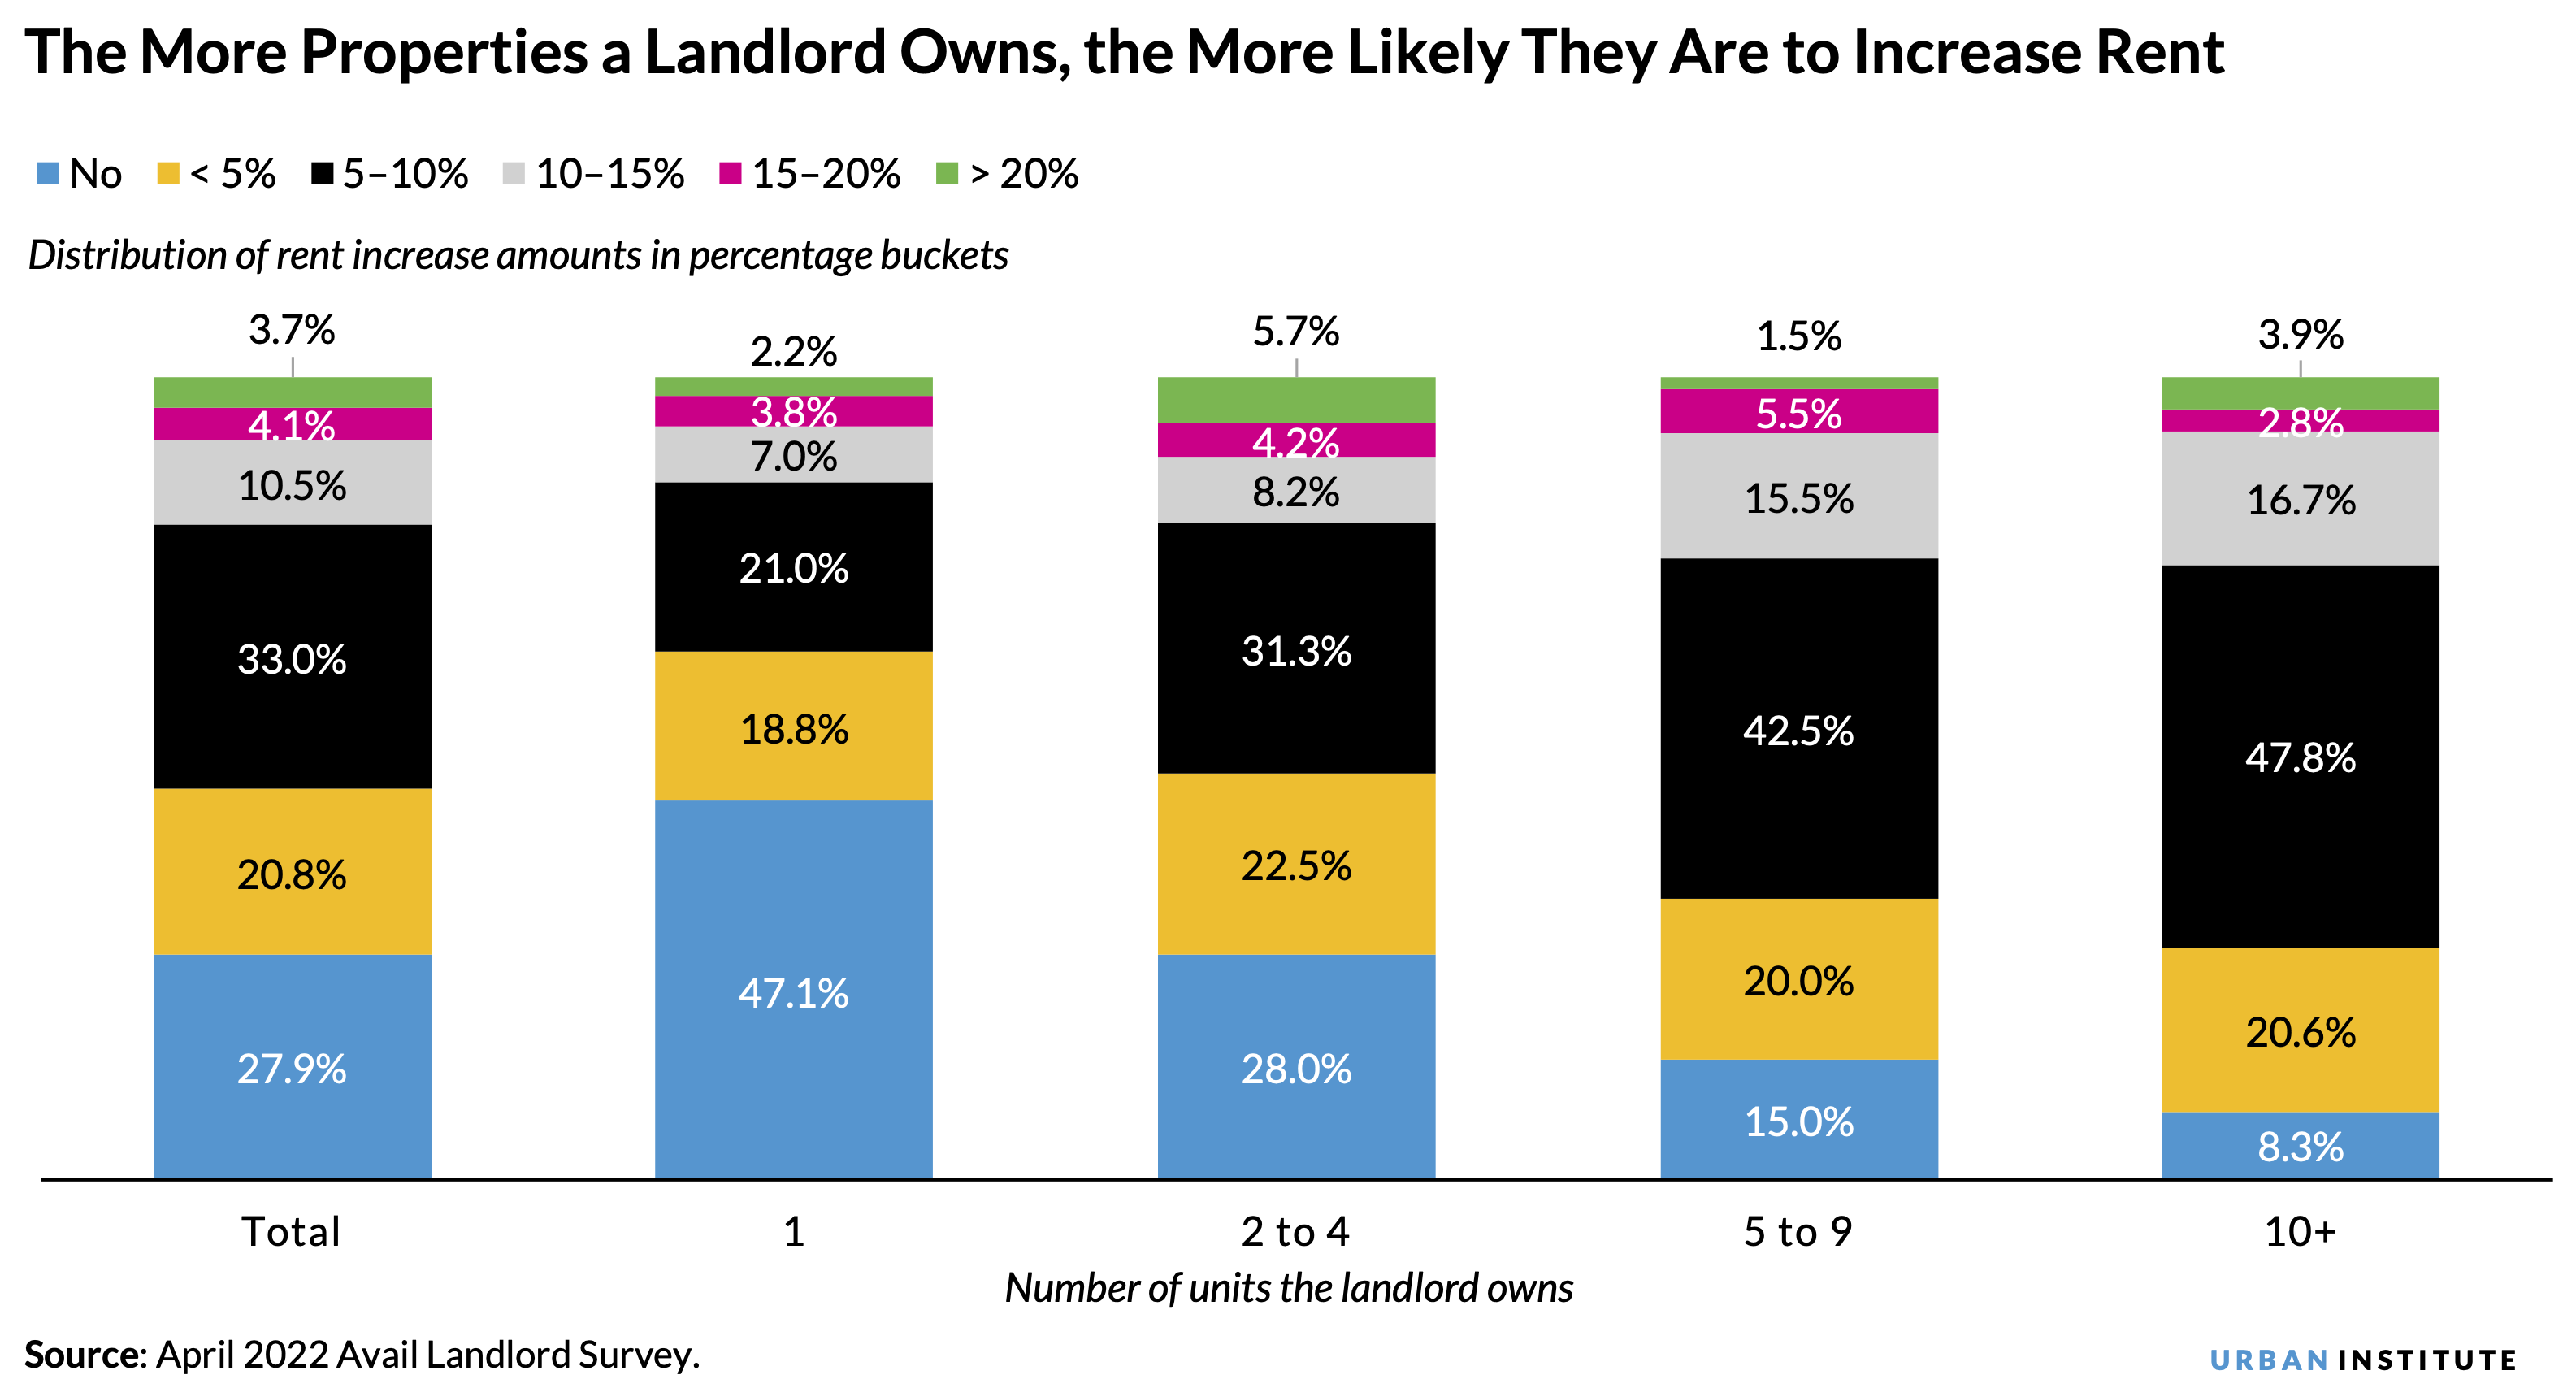 Bar chart showing that the more properties small landlords own, the more likely they are to increase rent